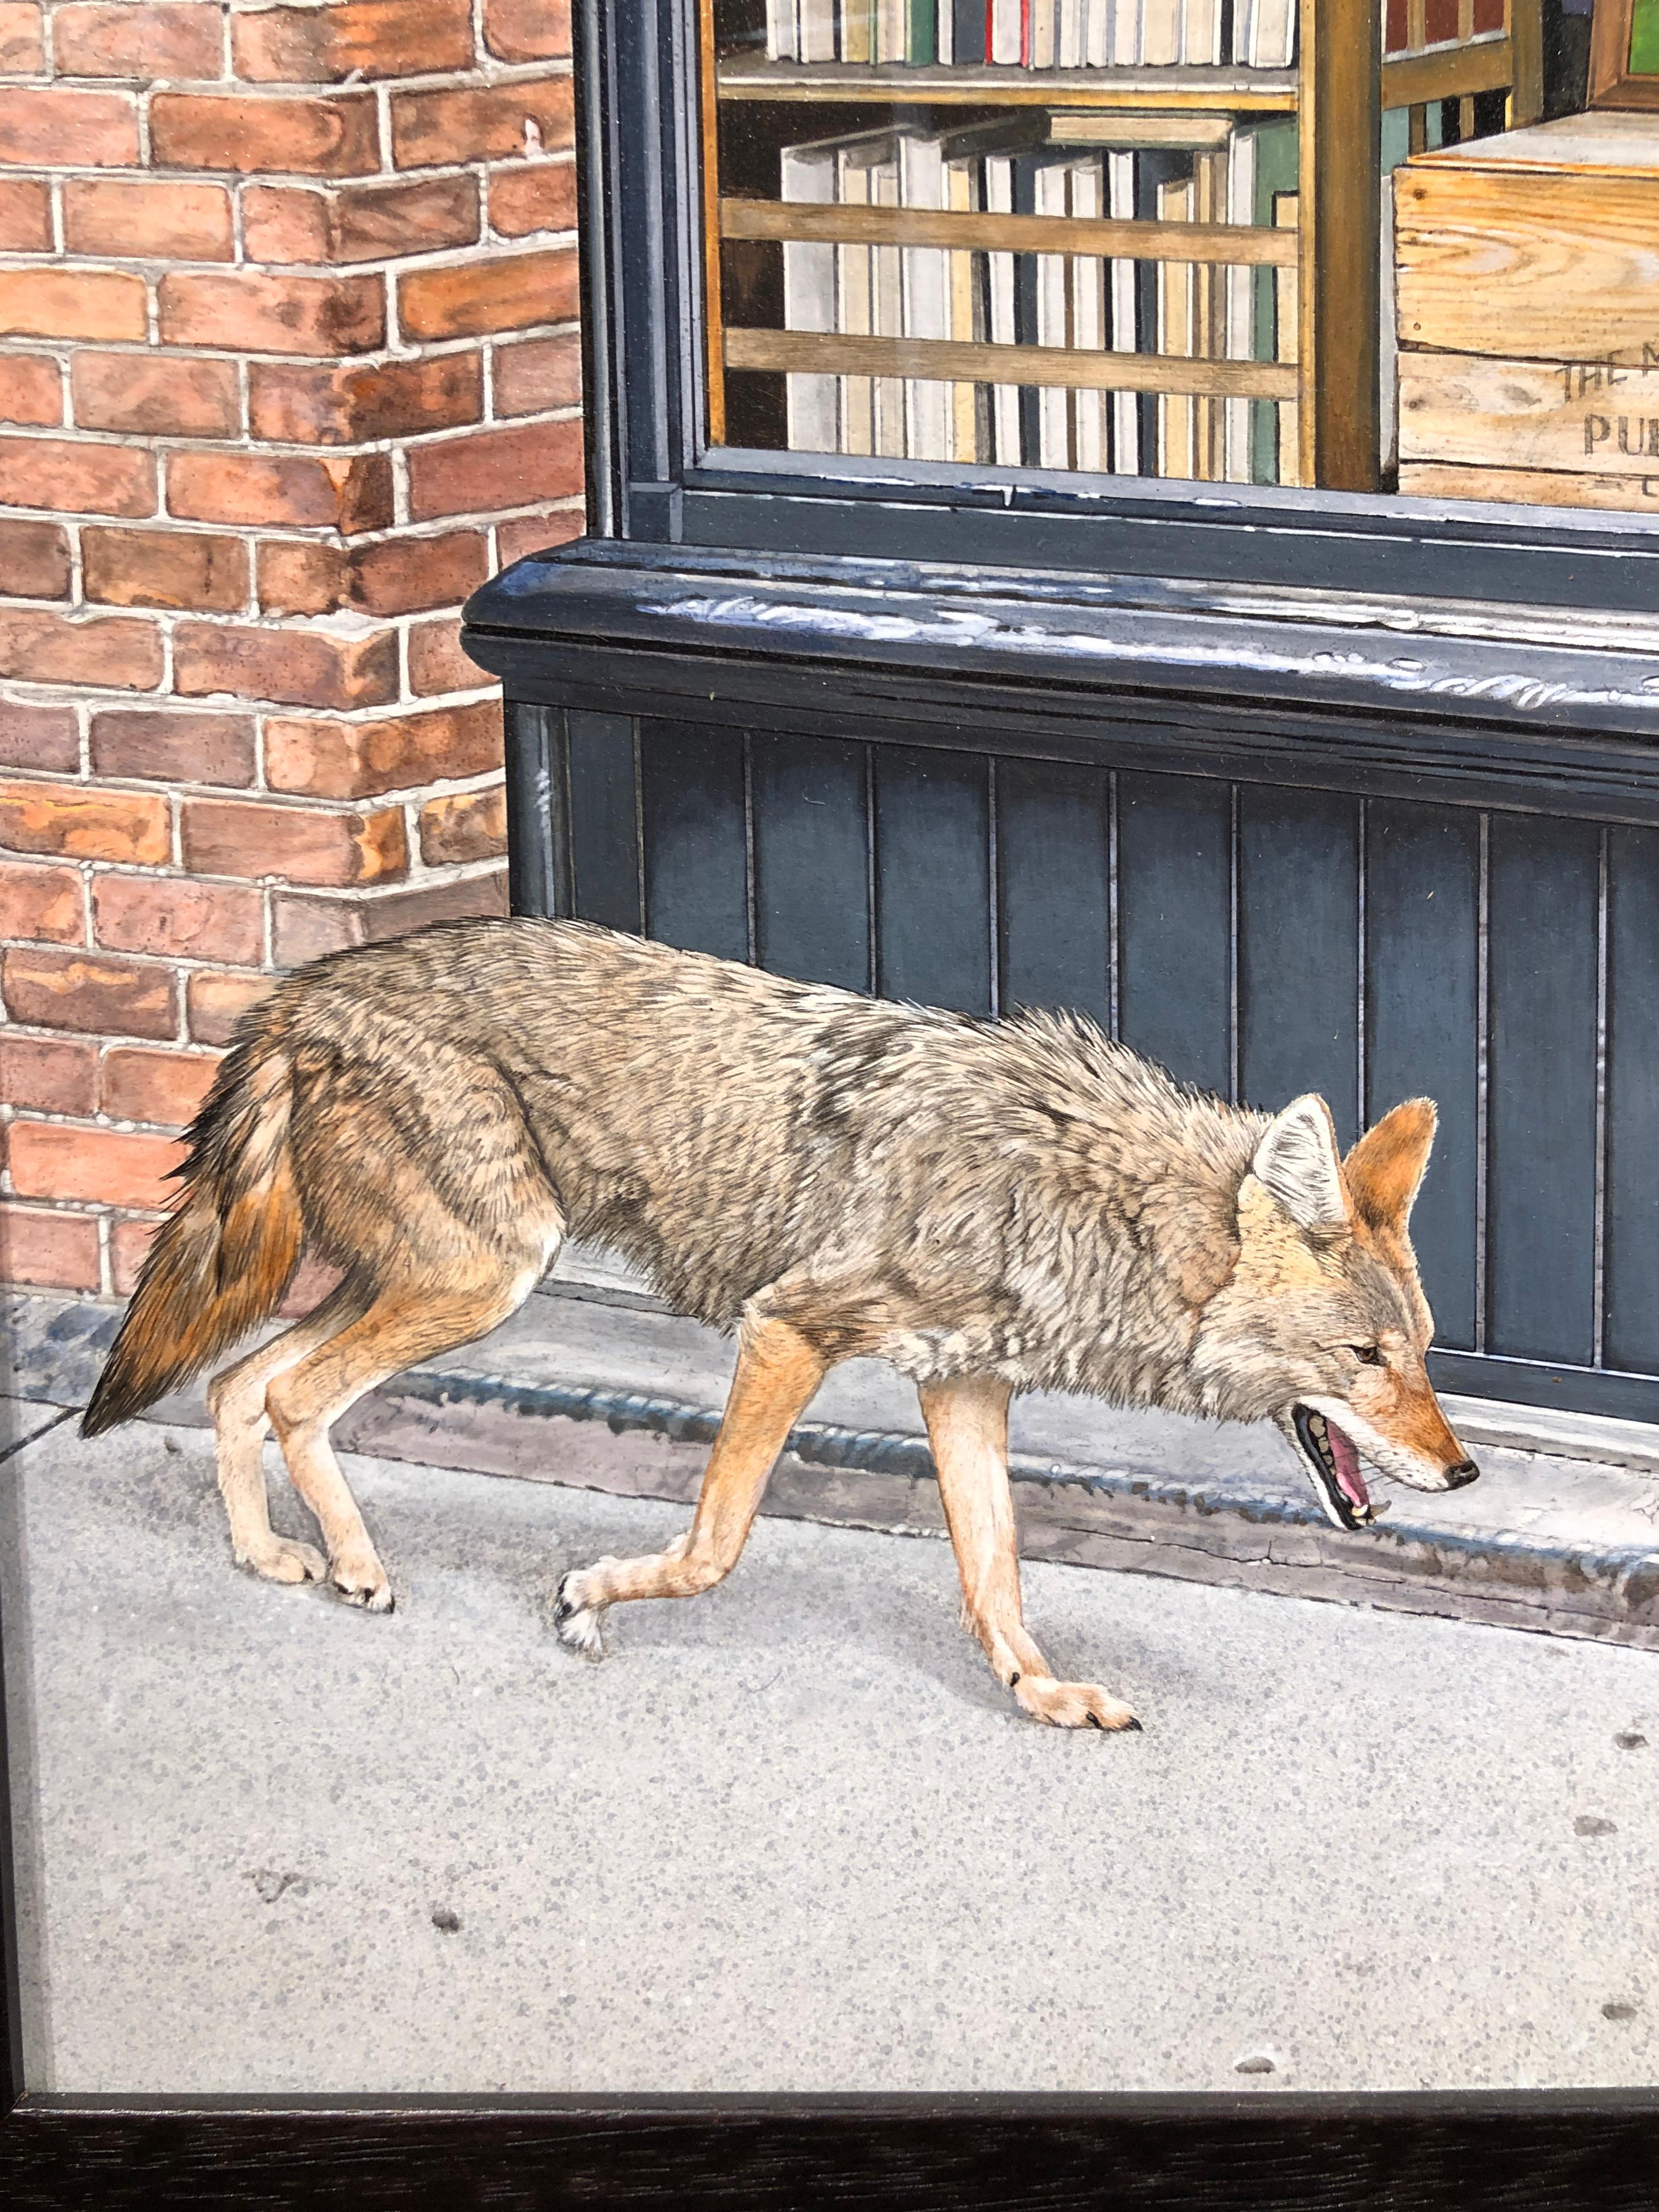 Urban Coyote - Highly Detailed Photorealist Painting of Coyote in Urban Setting For Sale 2